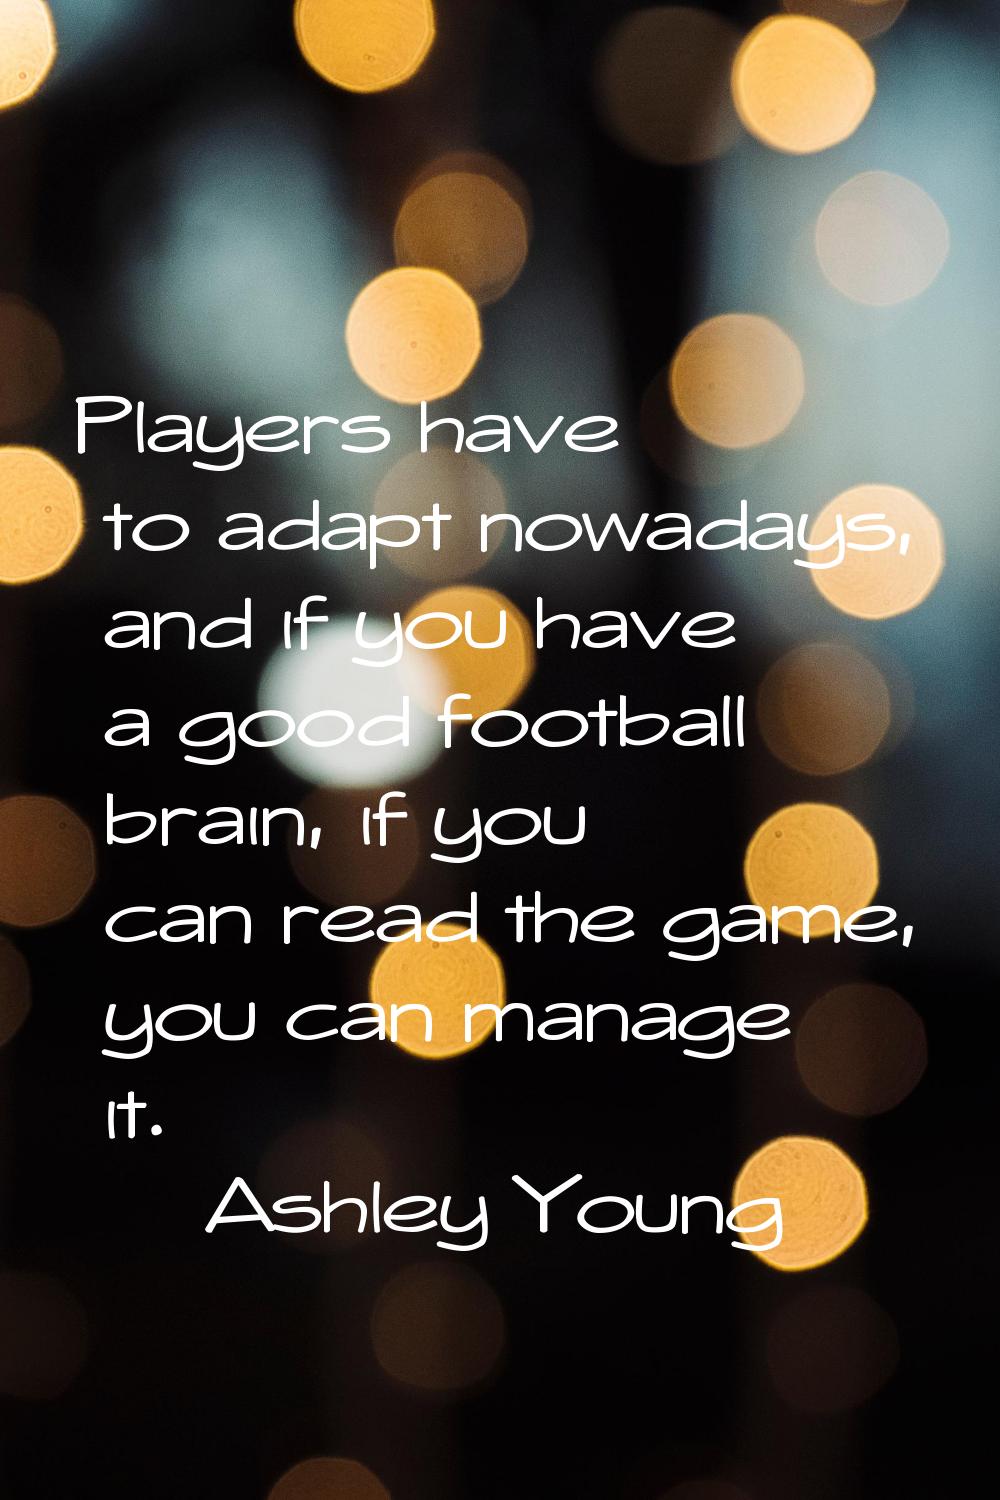 Players have to adapt nowadays, and if you have a good football brain, if you can read the game, yo